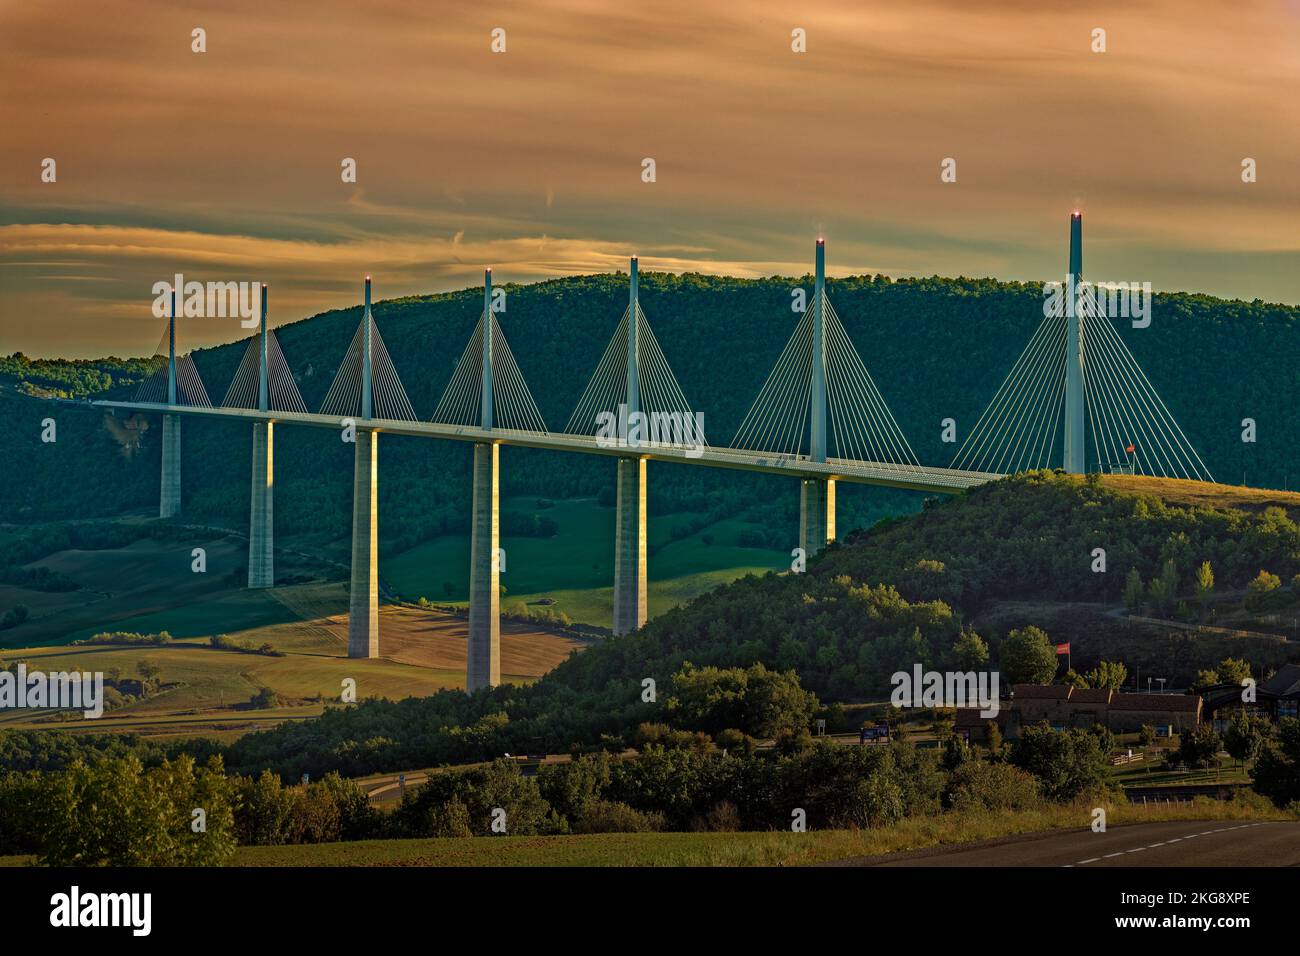 The Millau Viaduct carries the A75 trunk road, known as 'La Meridienne', across the River Tarn valley in Aveyron, Midi-Pyrenees, France Stock Photo